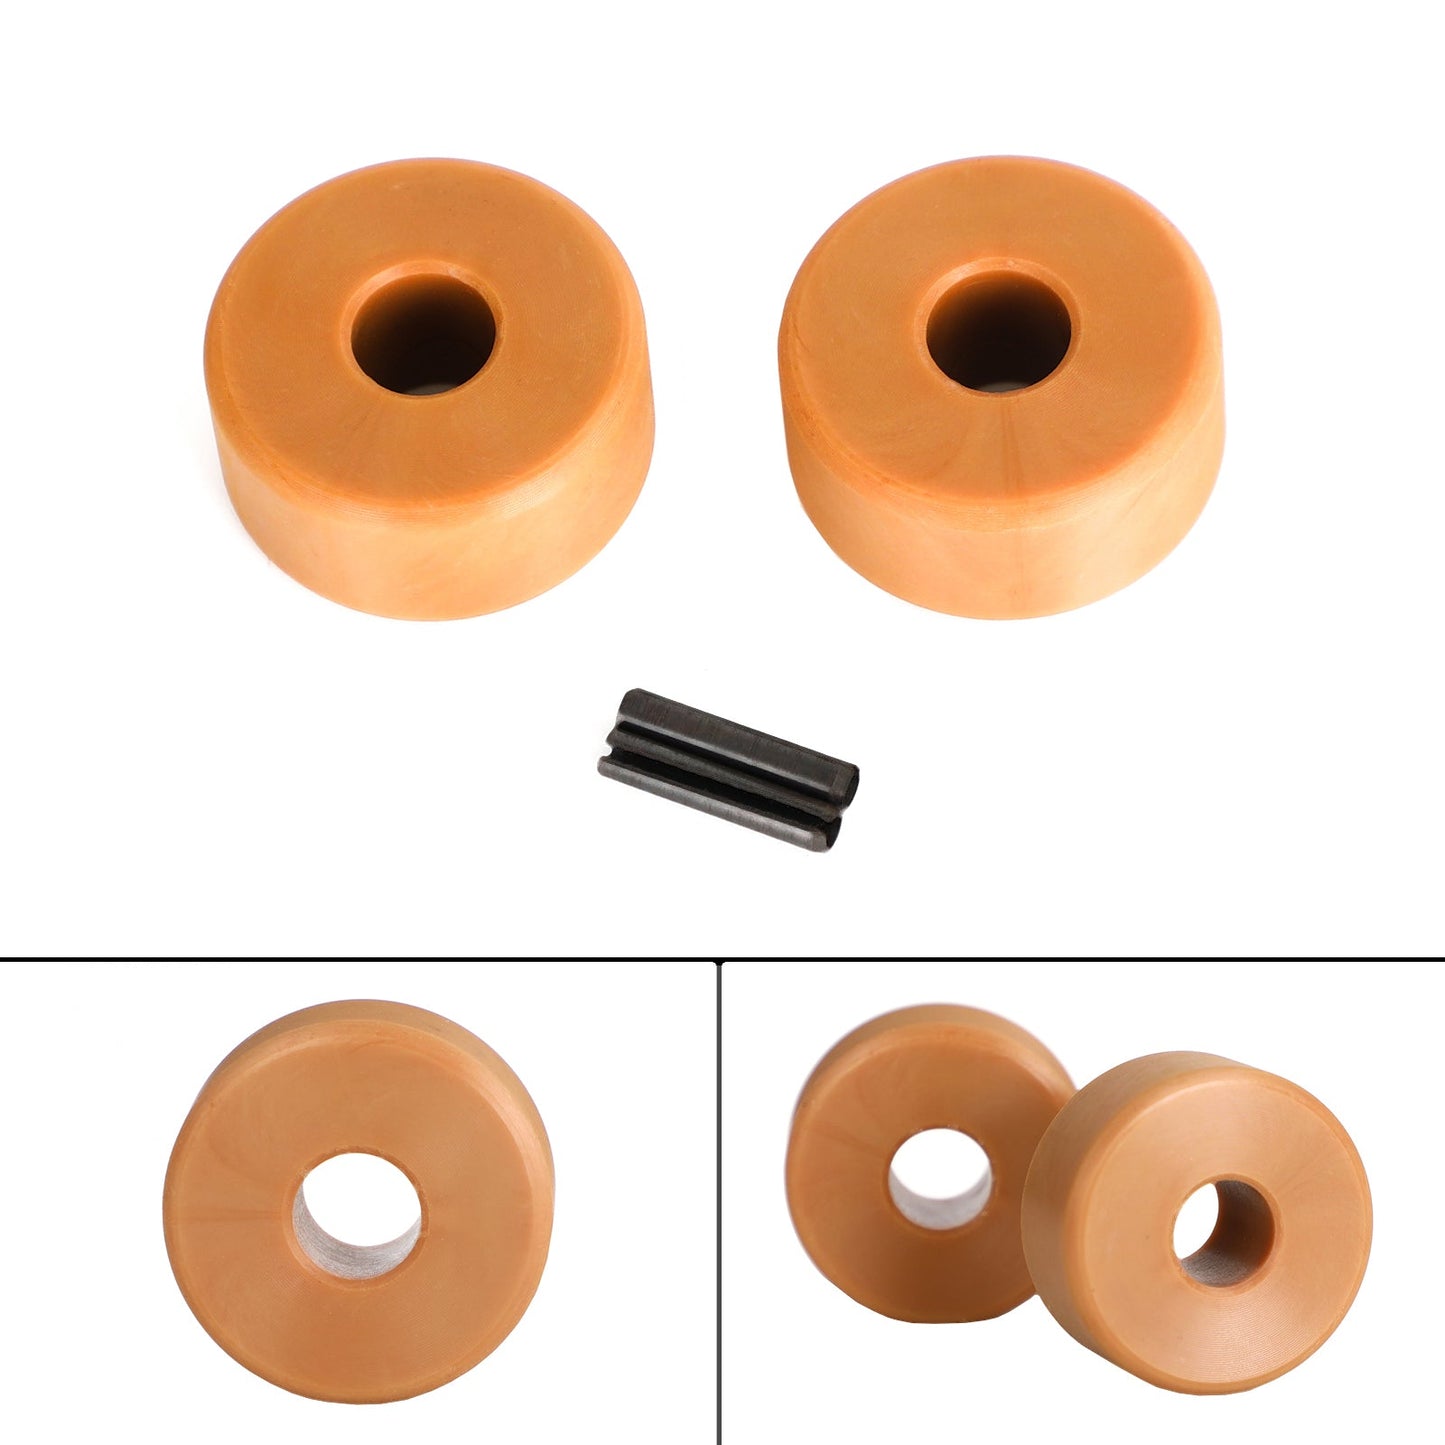 Secondary Clutch w/ Pins for Polaris Rollers Rzr Ranger 2016-2021 1000/900,Secondary Clutch Rollers with Upgraded Pins for Polaris RZR Ranger 2016-2021,Driven Clutch Roller Assembly w/ pins for Polaris Snowmobile Ranger XP4